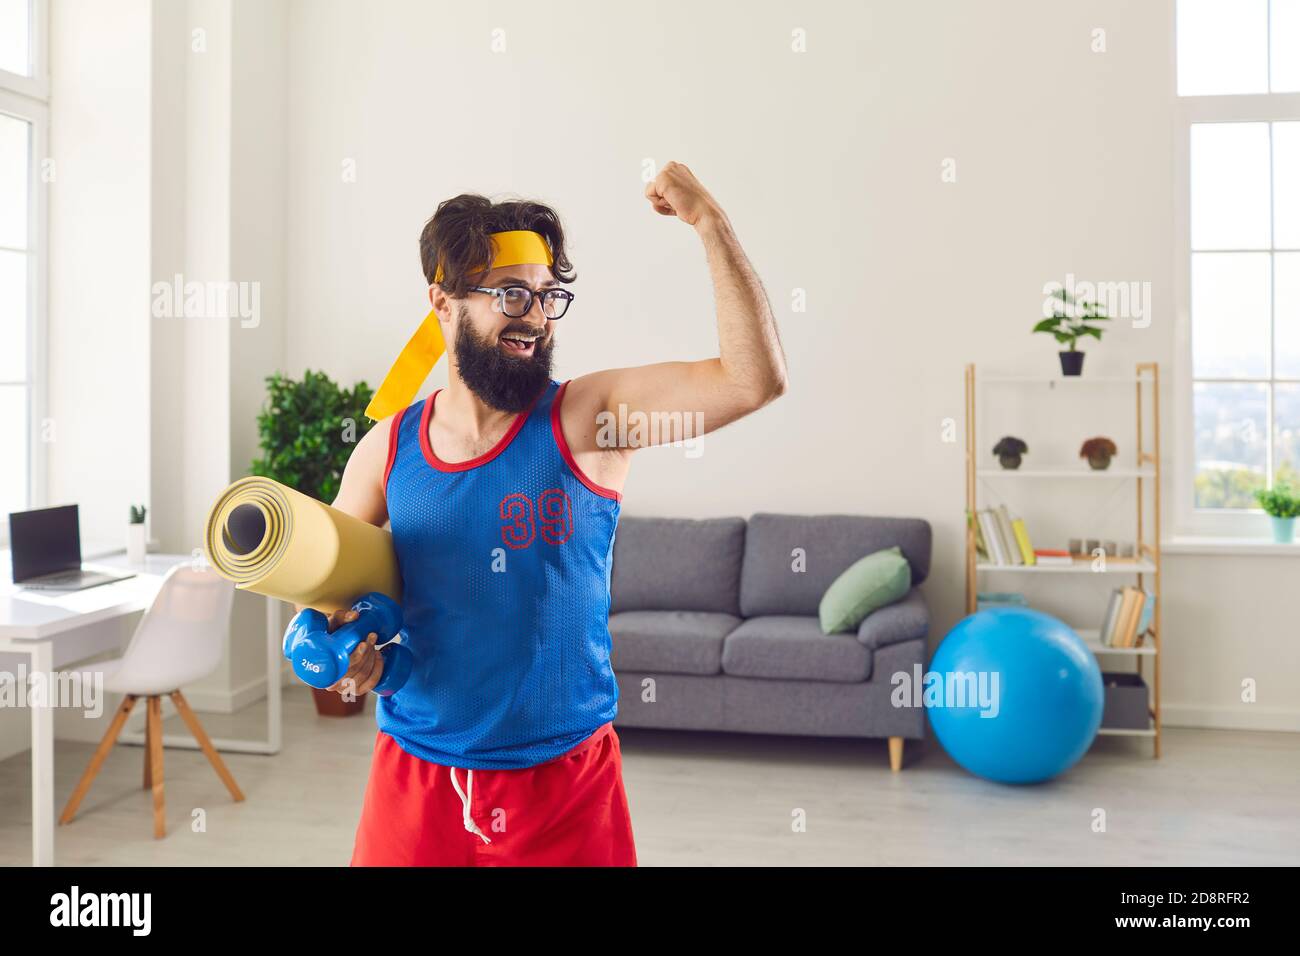 Funny athlete holding gym mat and dumbbells and showing his weak biceps after sport workout at home Stock Photo